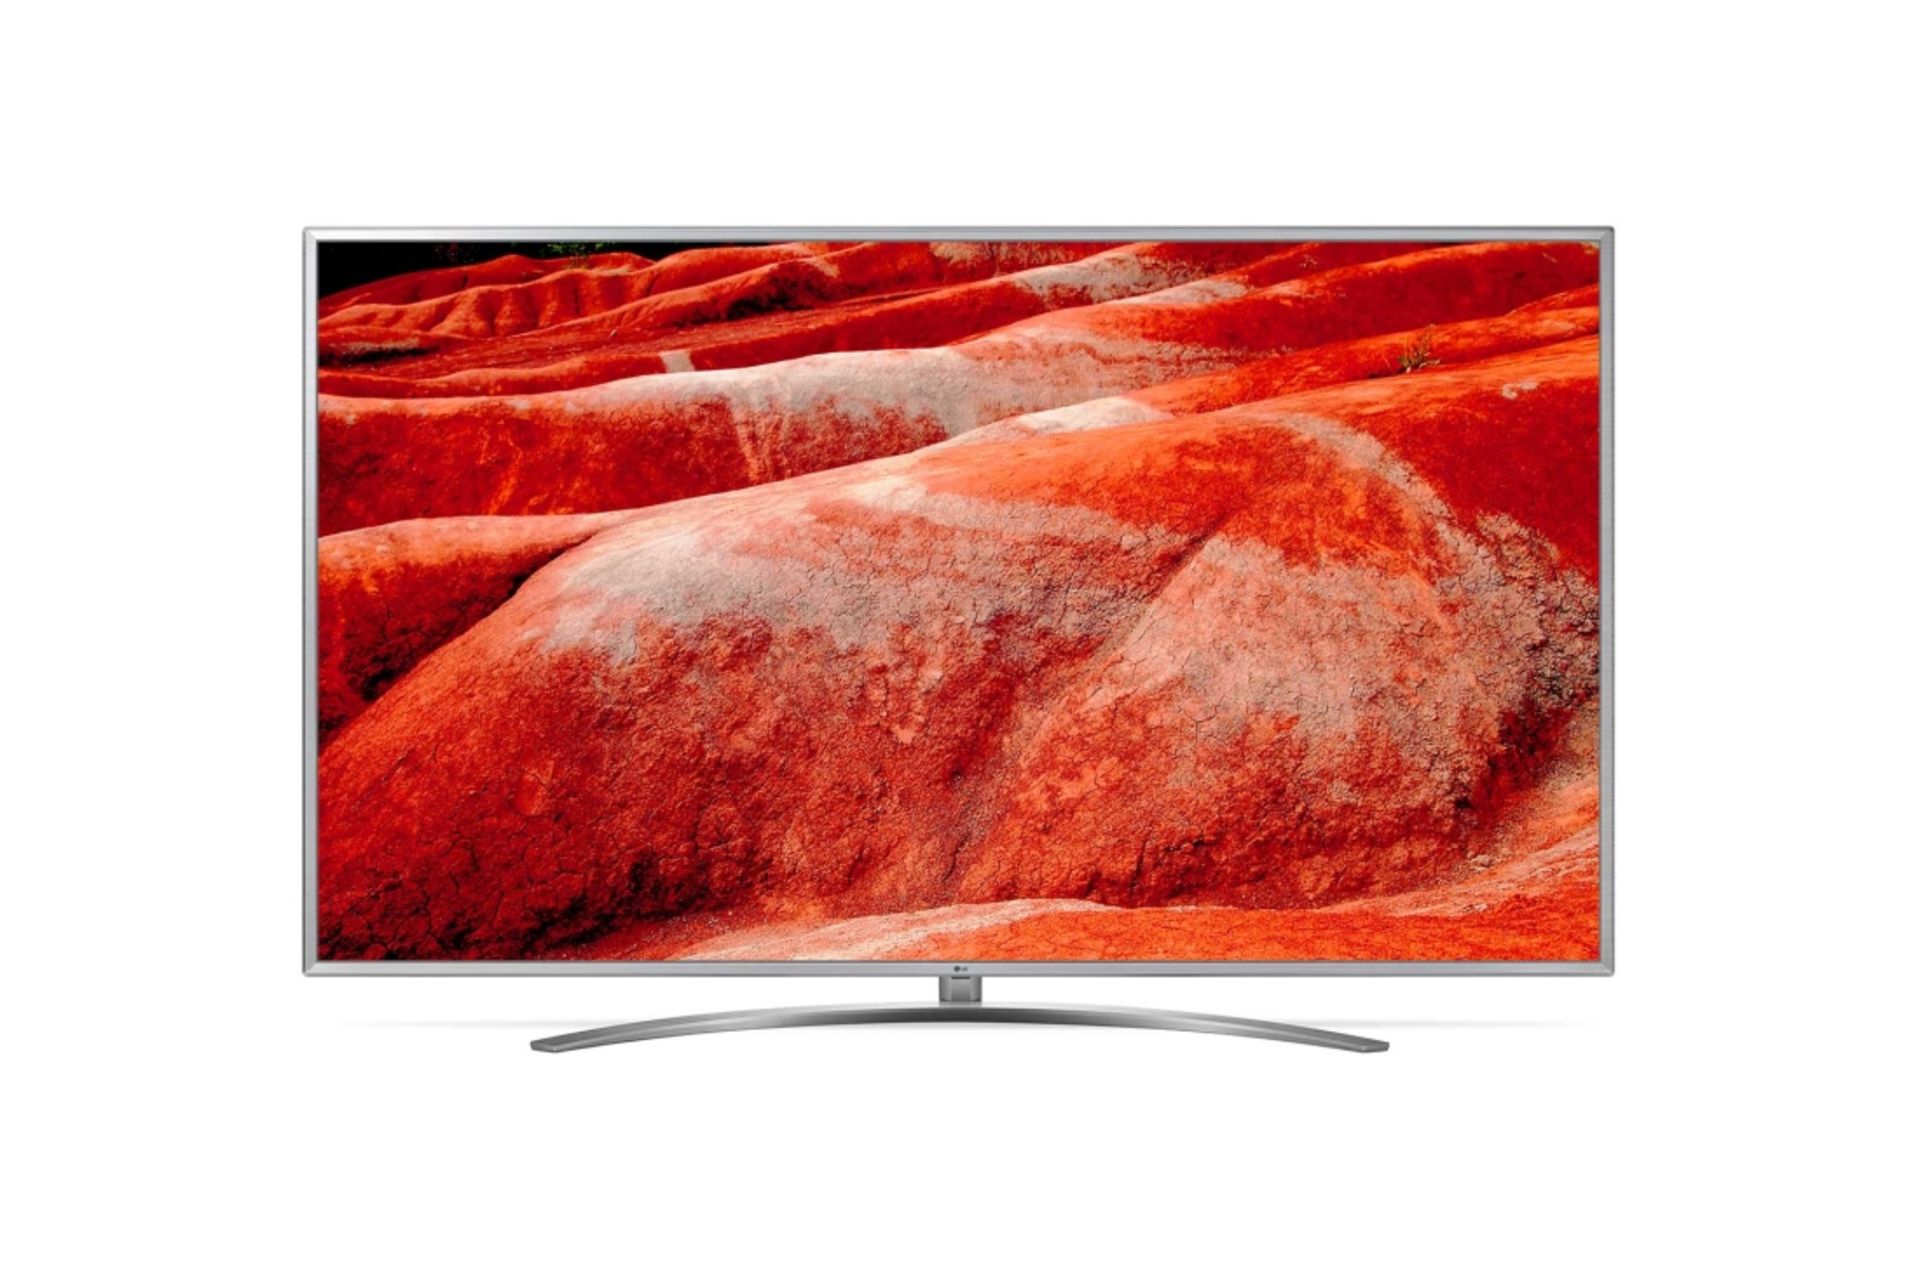 V Grade A LG 75 Inch ACTIVE HDR 4K ULTRA HD LED SMART TV WITH FREEVIEW HD & WEBOS & WIFI - AI TV